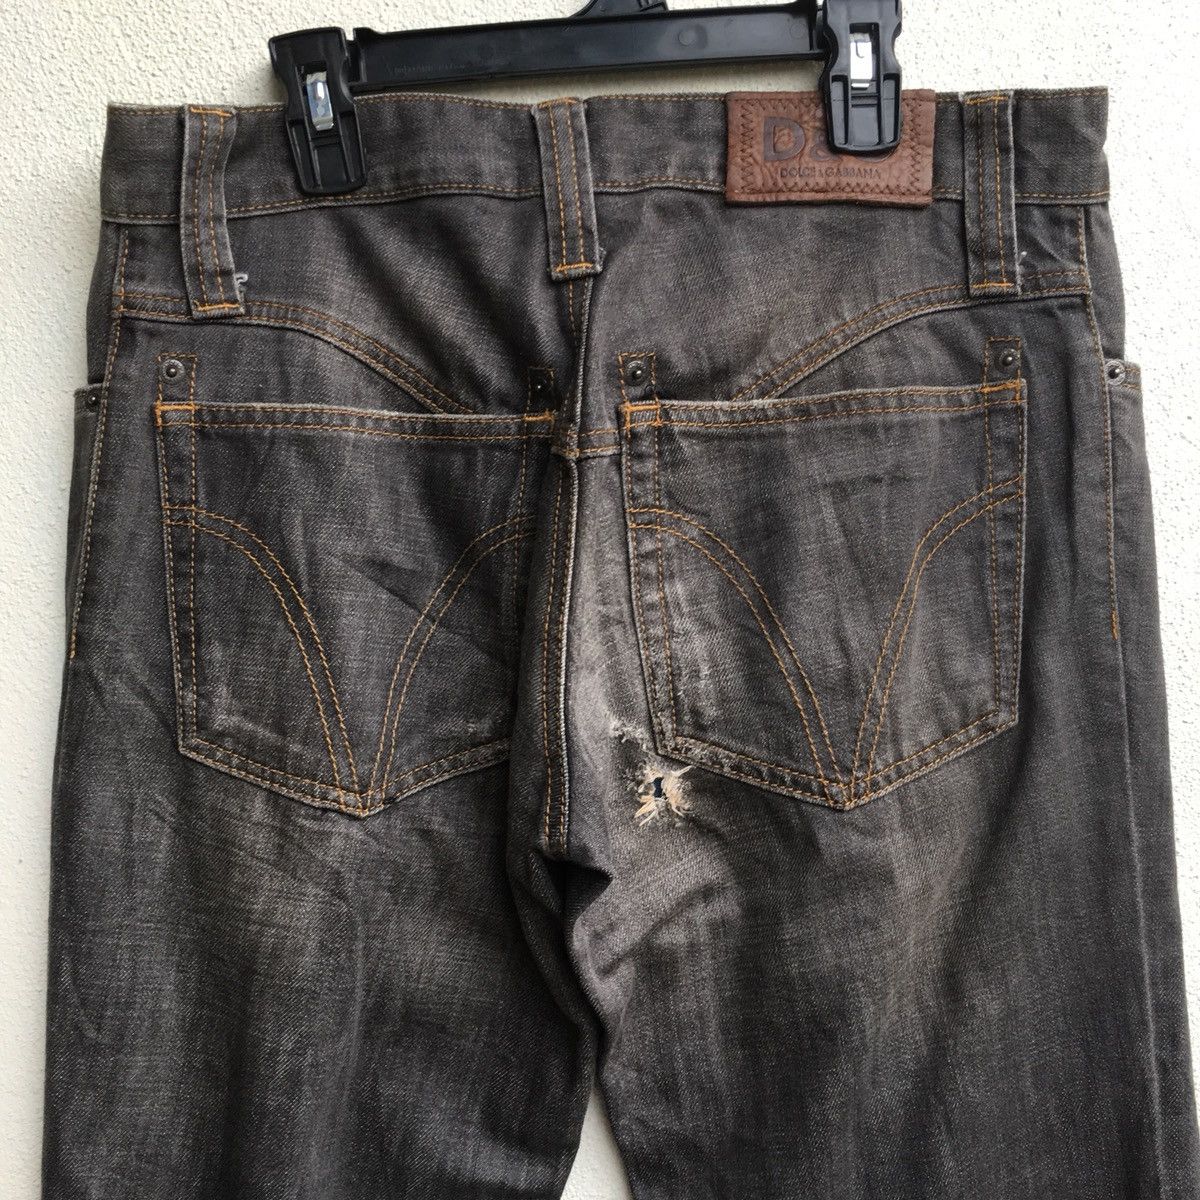 D&G FW05/06 Distressed Jeans - 4